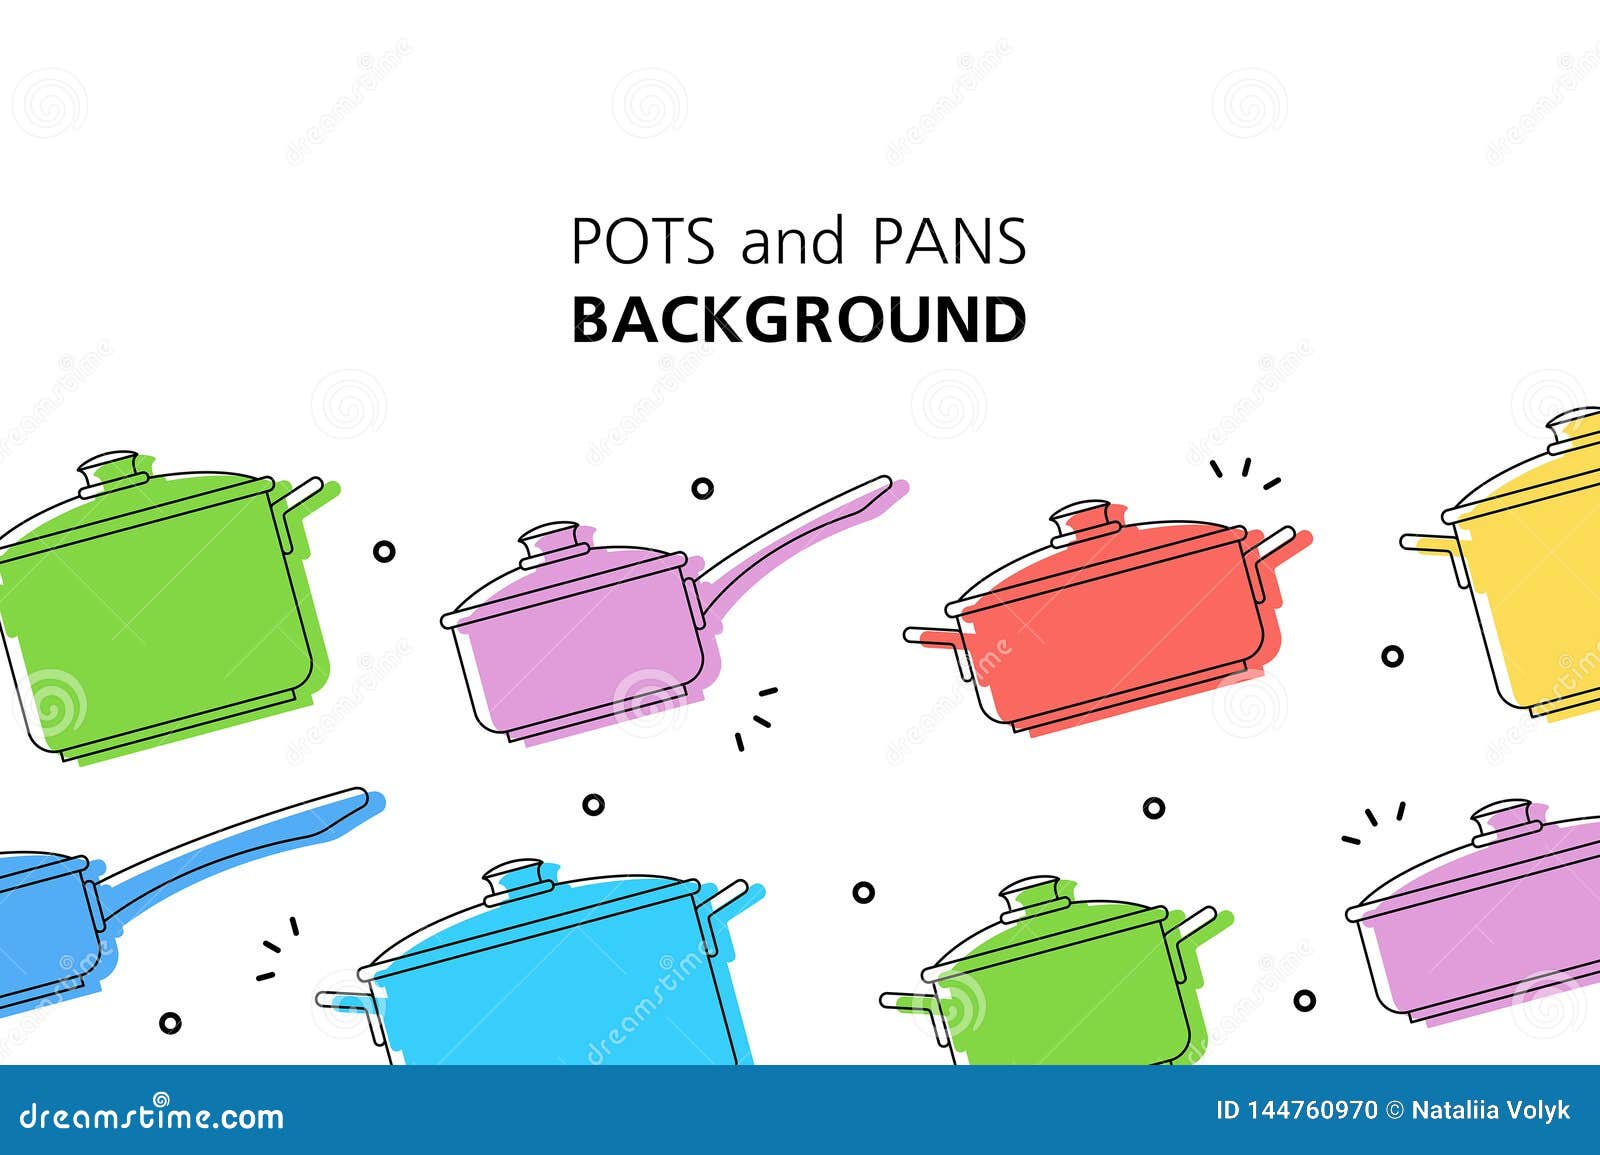 pots and pans background